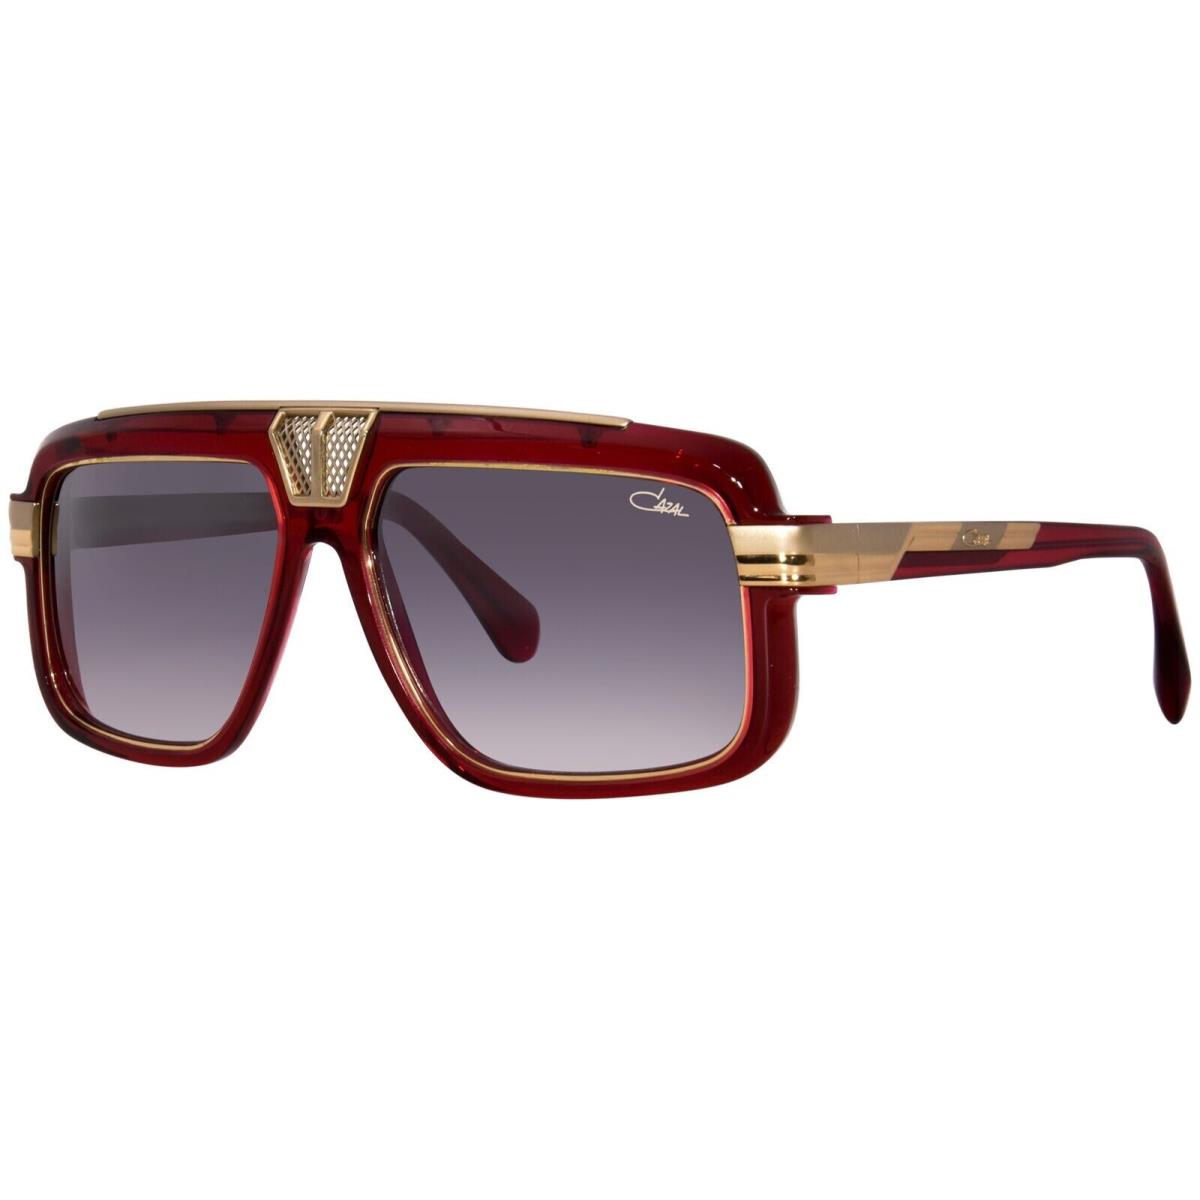 Cazal Legends Mod. 678 Col. 004 Red Gold Sunglasses Made IN Germany